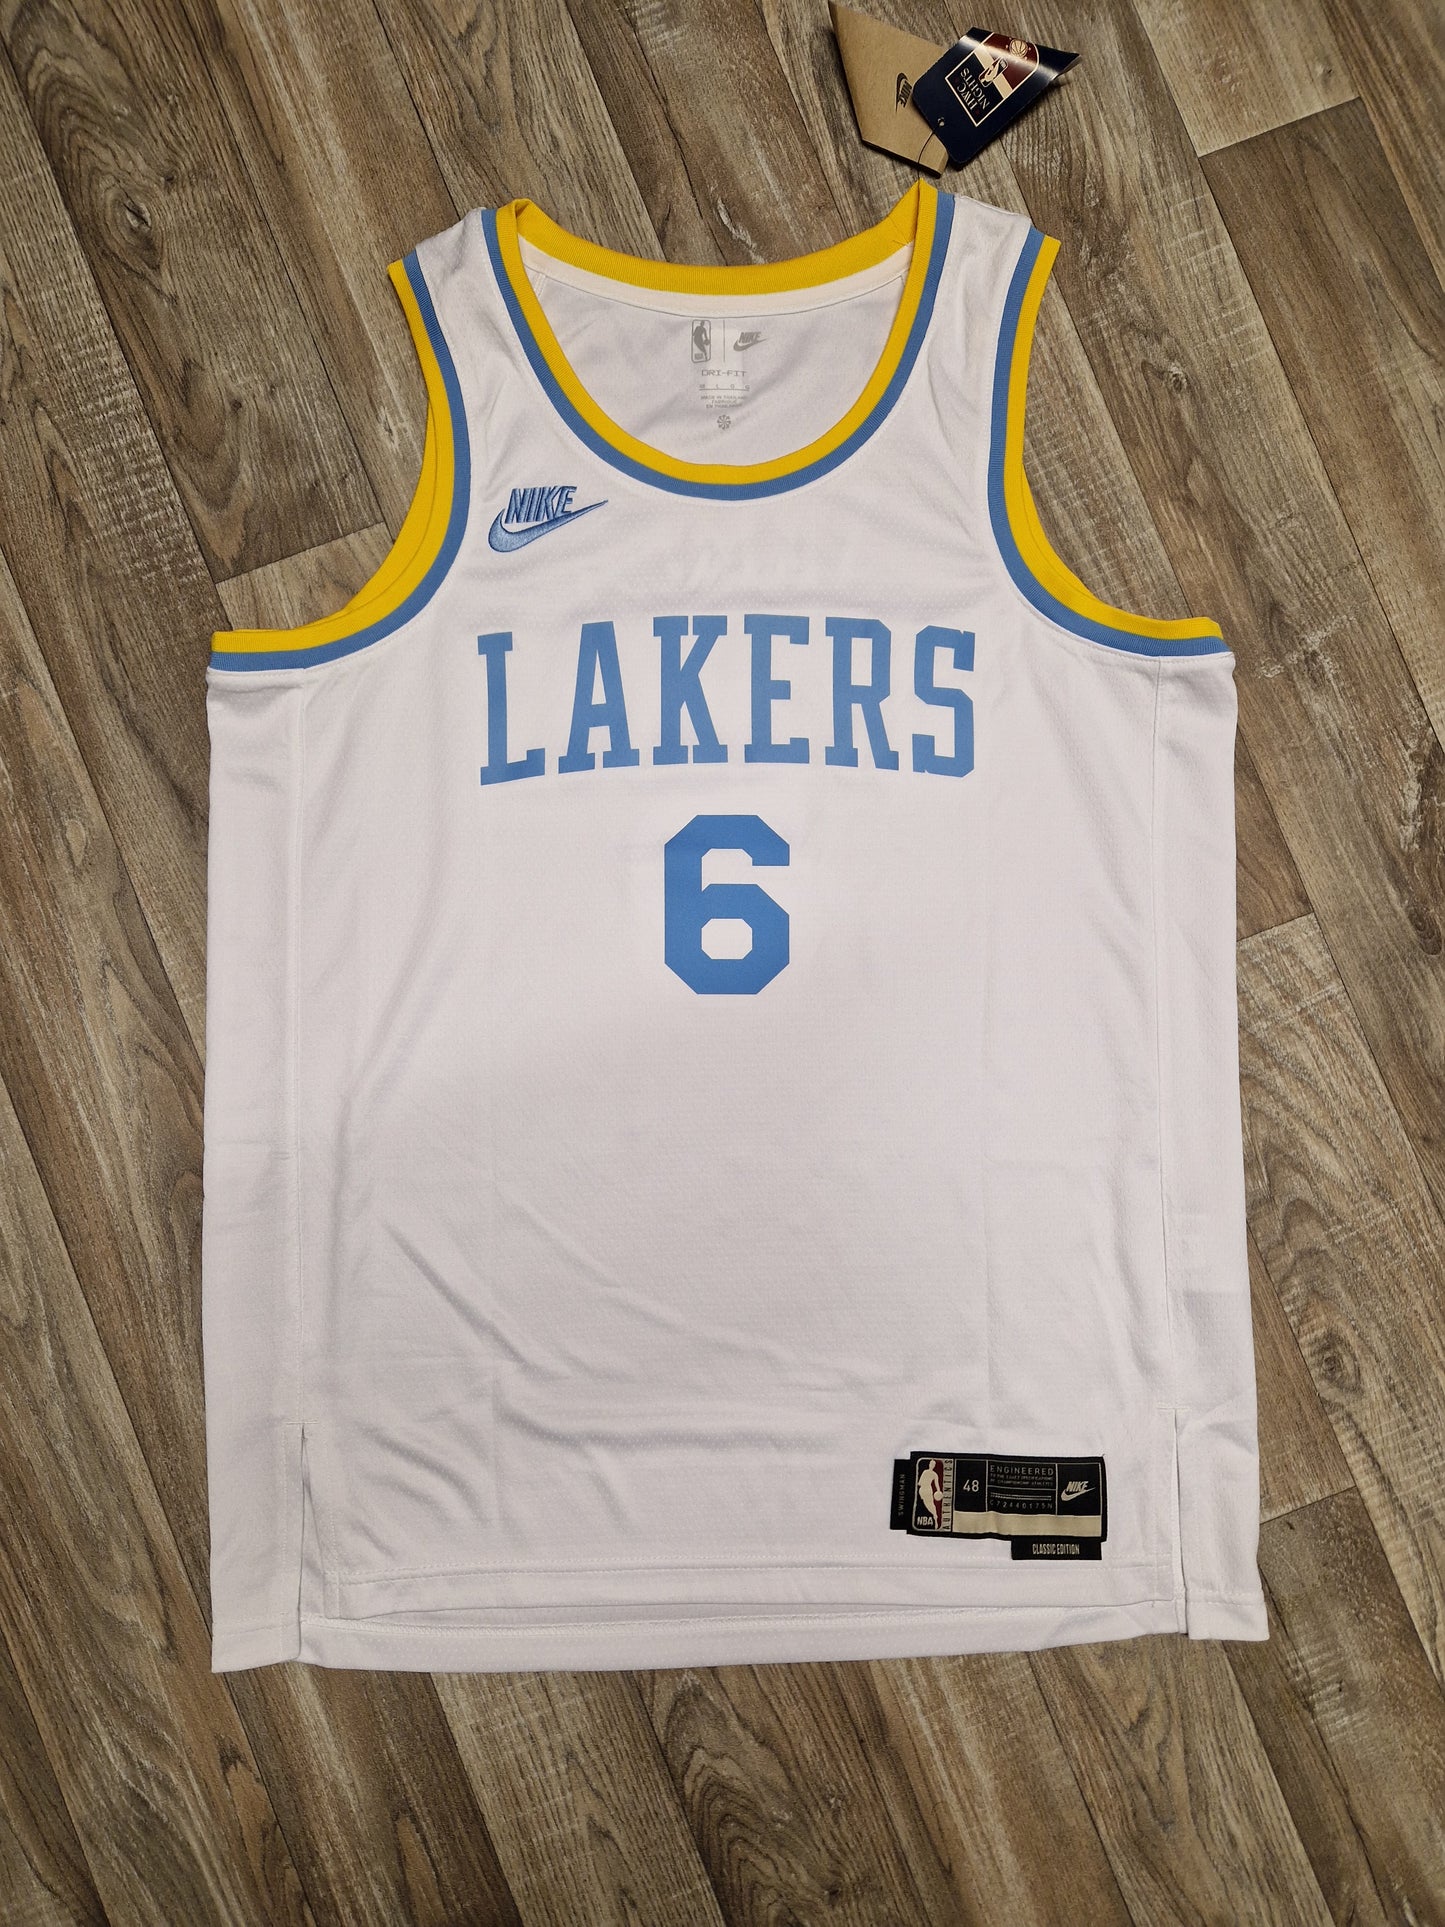 LeBron James Los Angeles Lakers Jersey Size Large